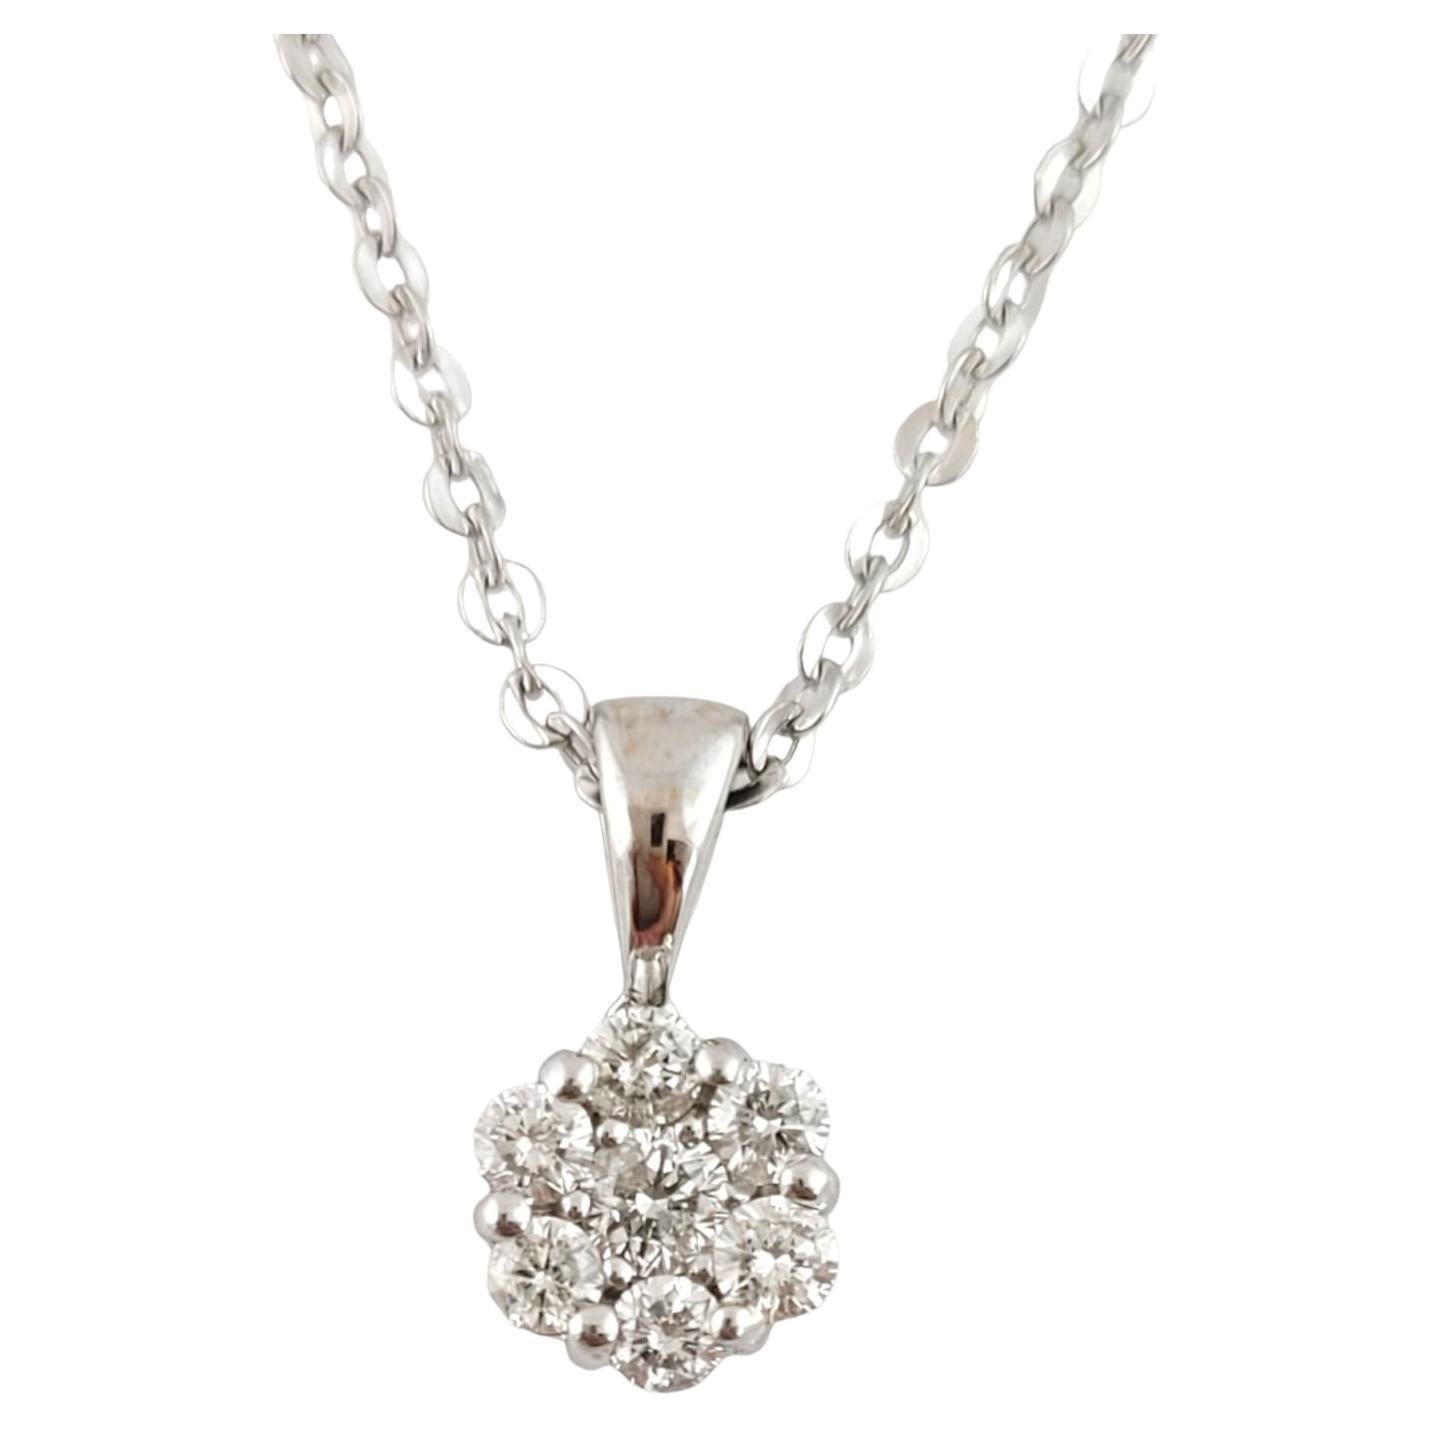 Vintage 14 Karat White Gold Diamond Pendant Necklace

This sparkling pendant features seven round brilliant cut diamonds set in elegant 14K white gold. Suspended from a classic cable necklace.

Approximate total diamond weight: .31 ct.

Diamond